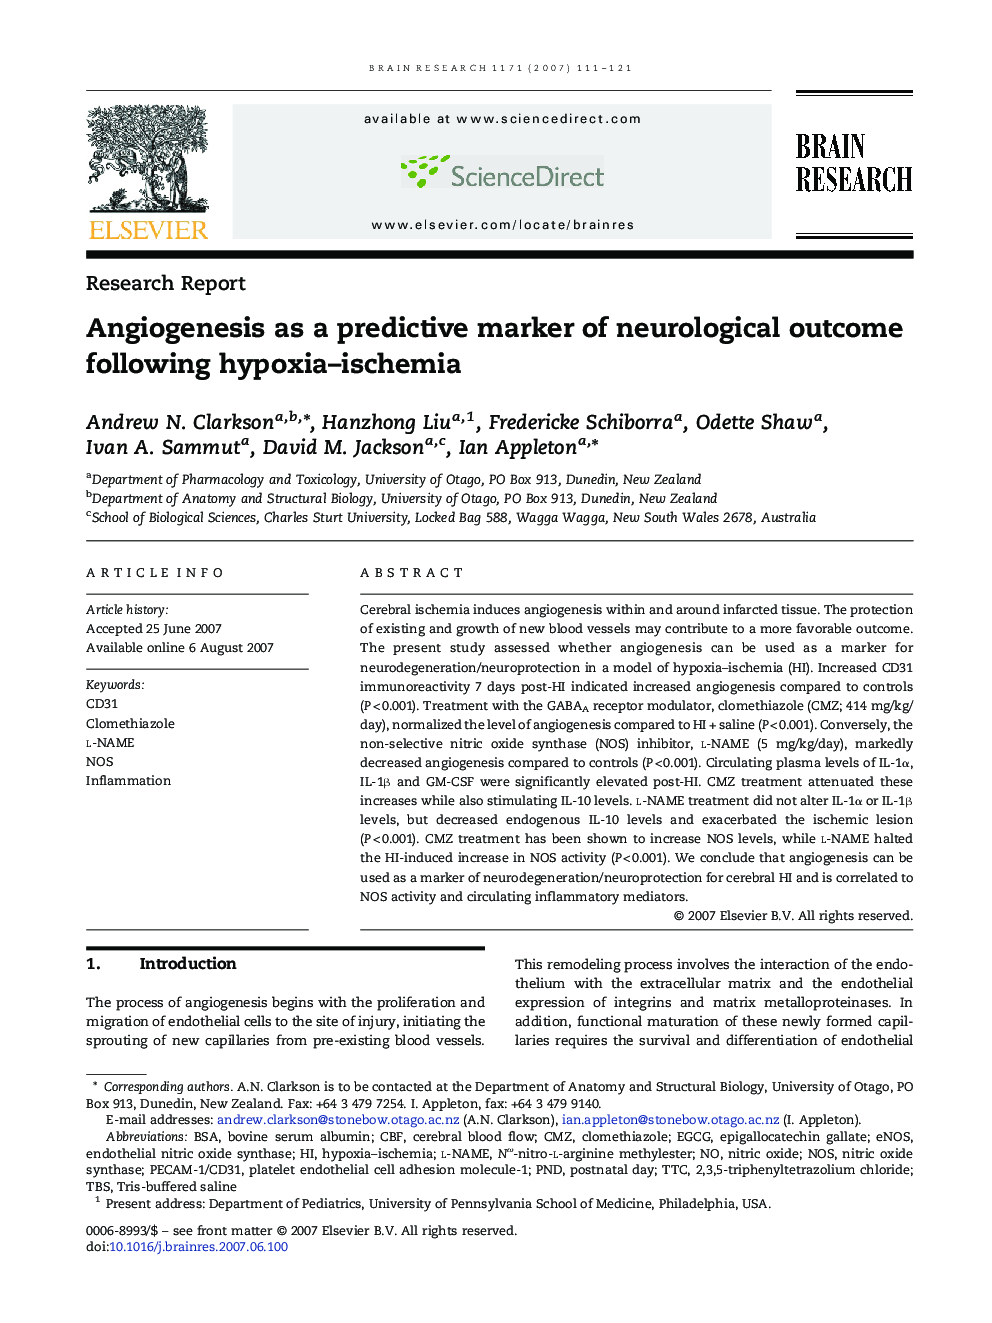 Angiogenesis as a predictive marker of neurological outcome following hypoxia–ischemia